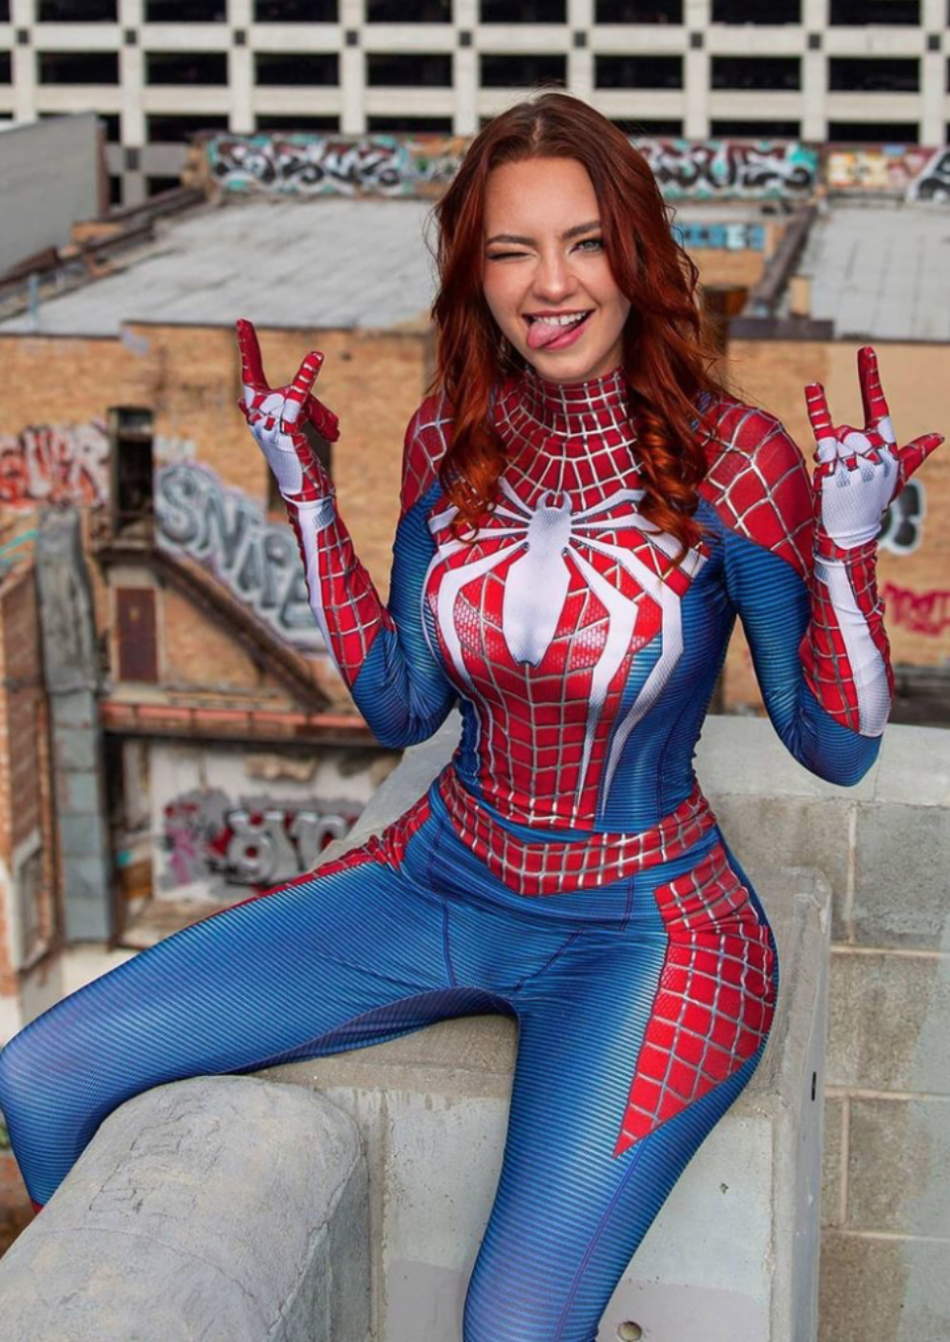 Sexy Red Hot Cosplay Girls Spiderman Women Best Photo Compilation 2021 (89 HQ Photos) 15